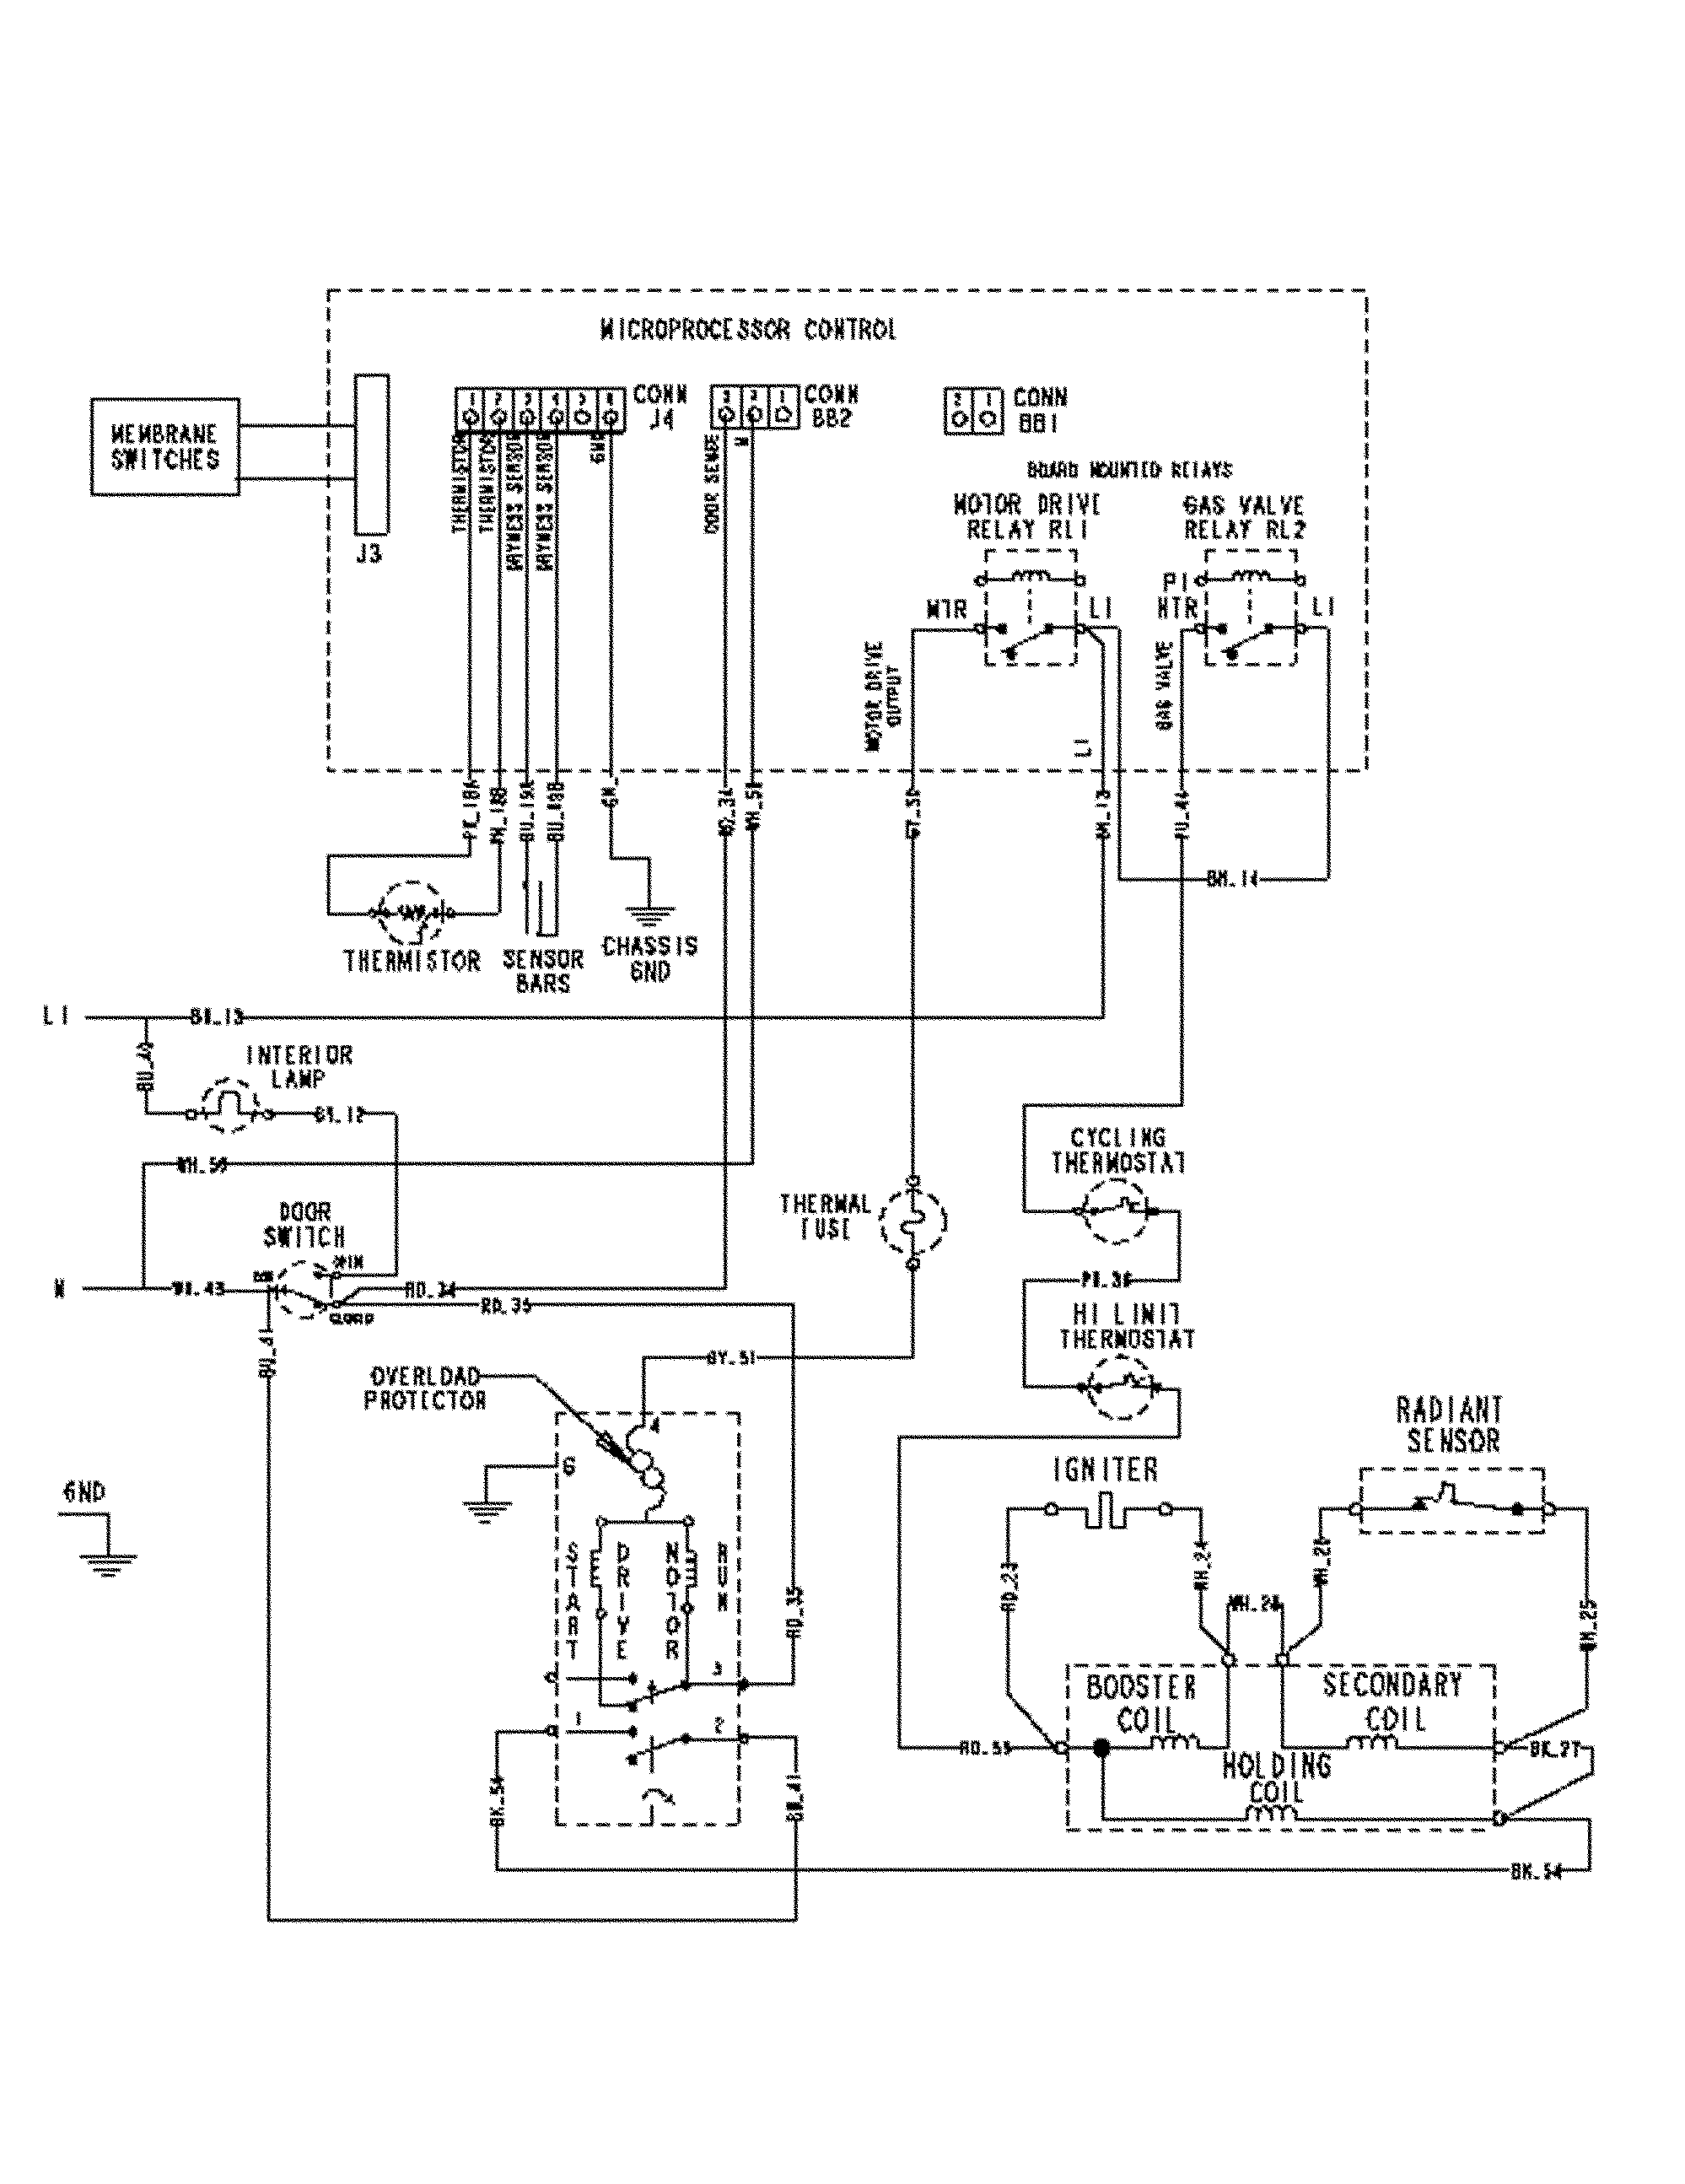 Maytag Dryer Heating Element Wiring Diagram from c.searspartsdirect.com